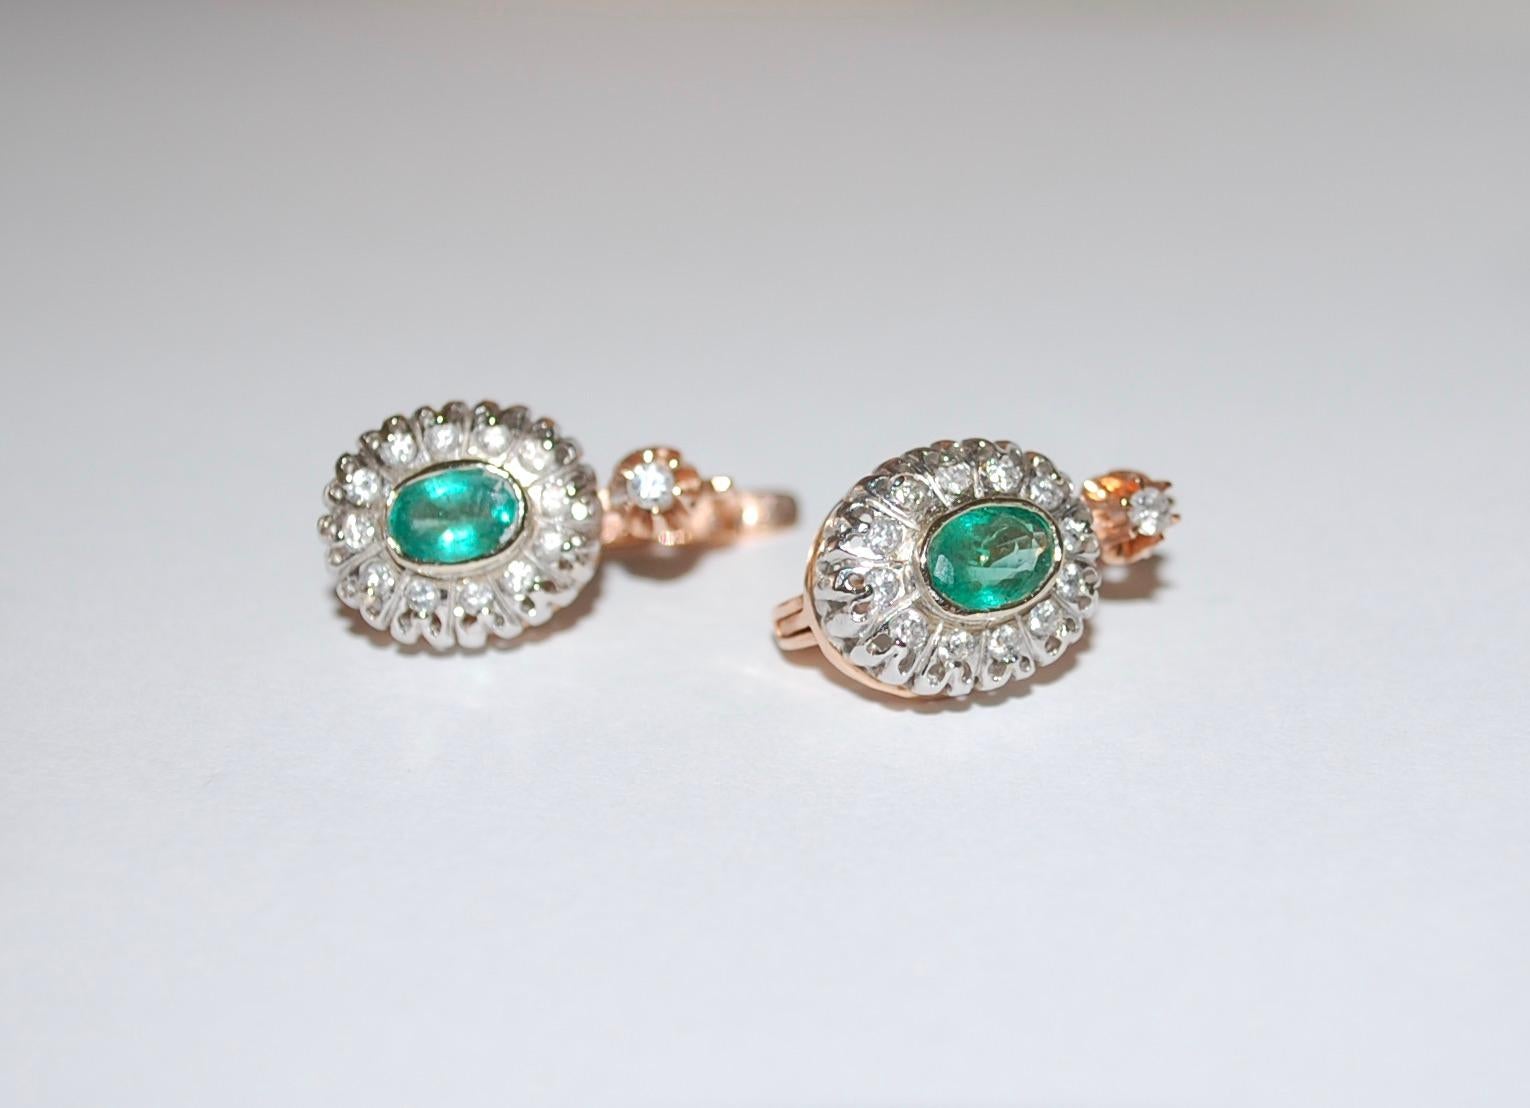 Antique Gold Emerald and Diamond Earrings and Ring For Sale 4